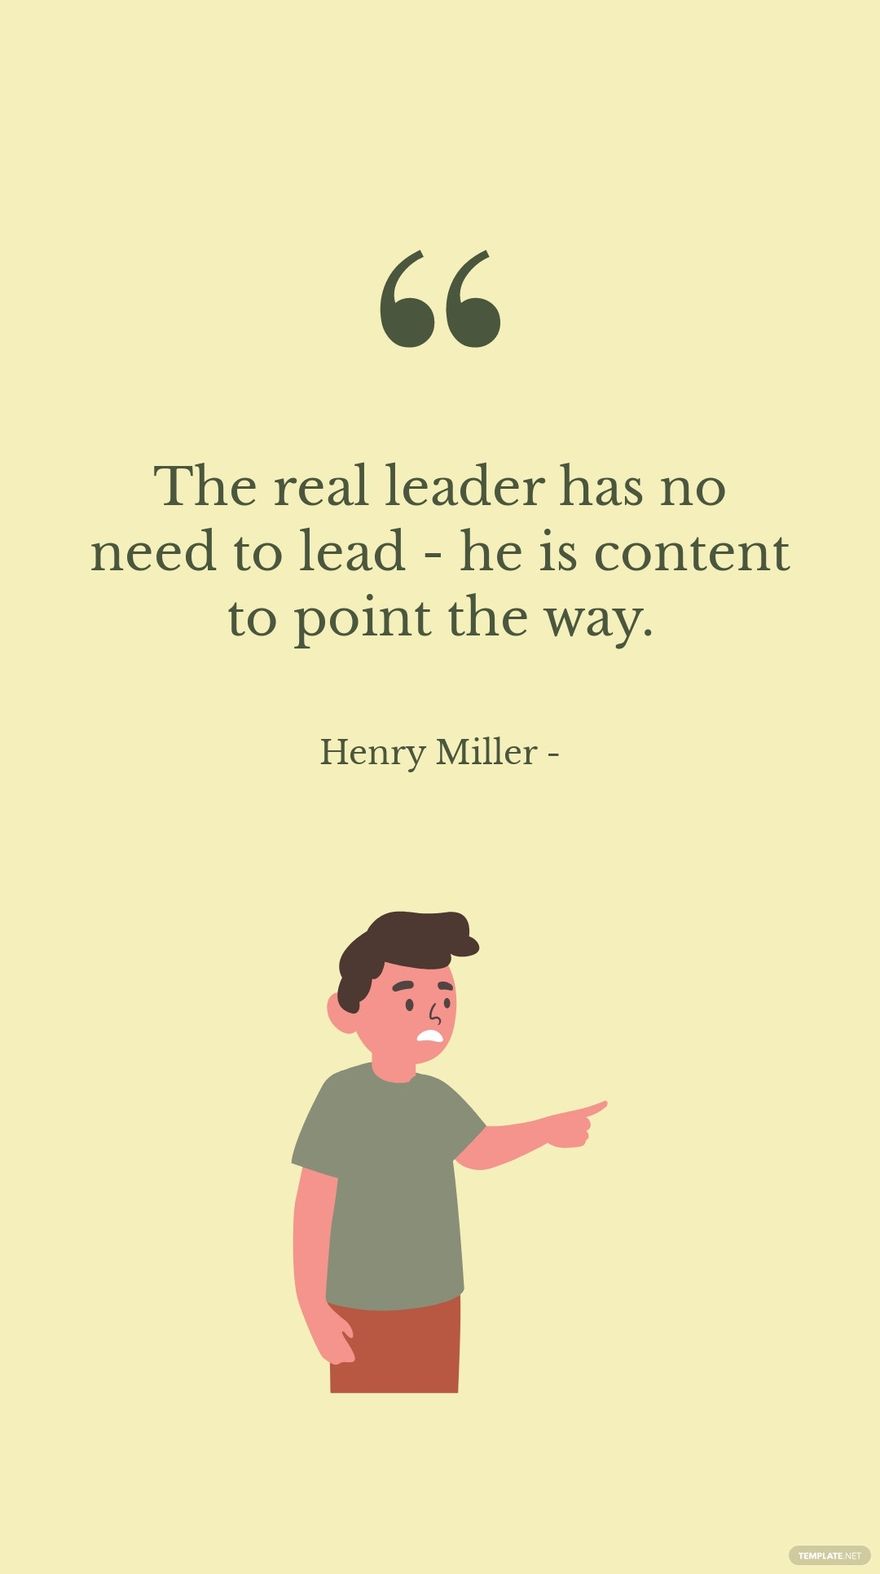 Free Henry Miller - The real leader has no need to lead - he is content to point the way.